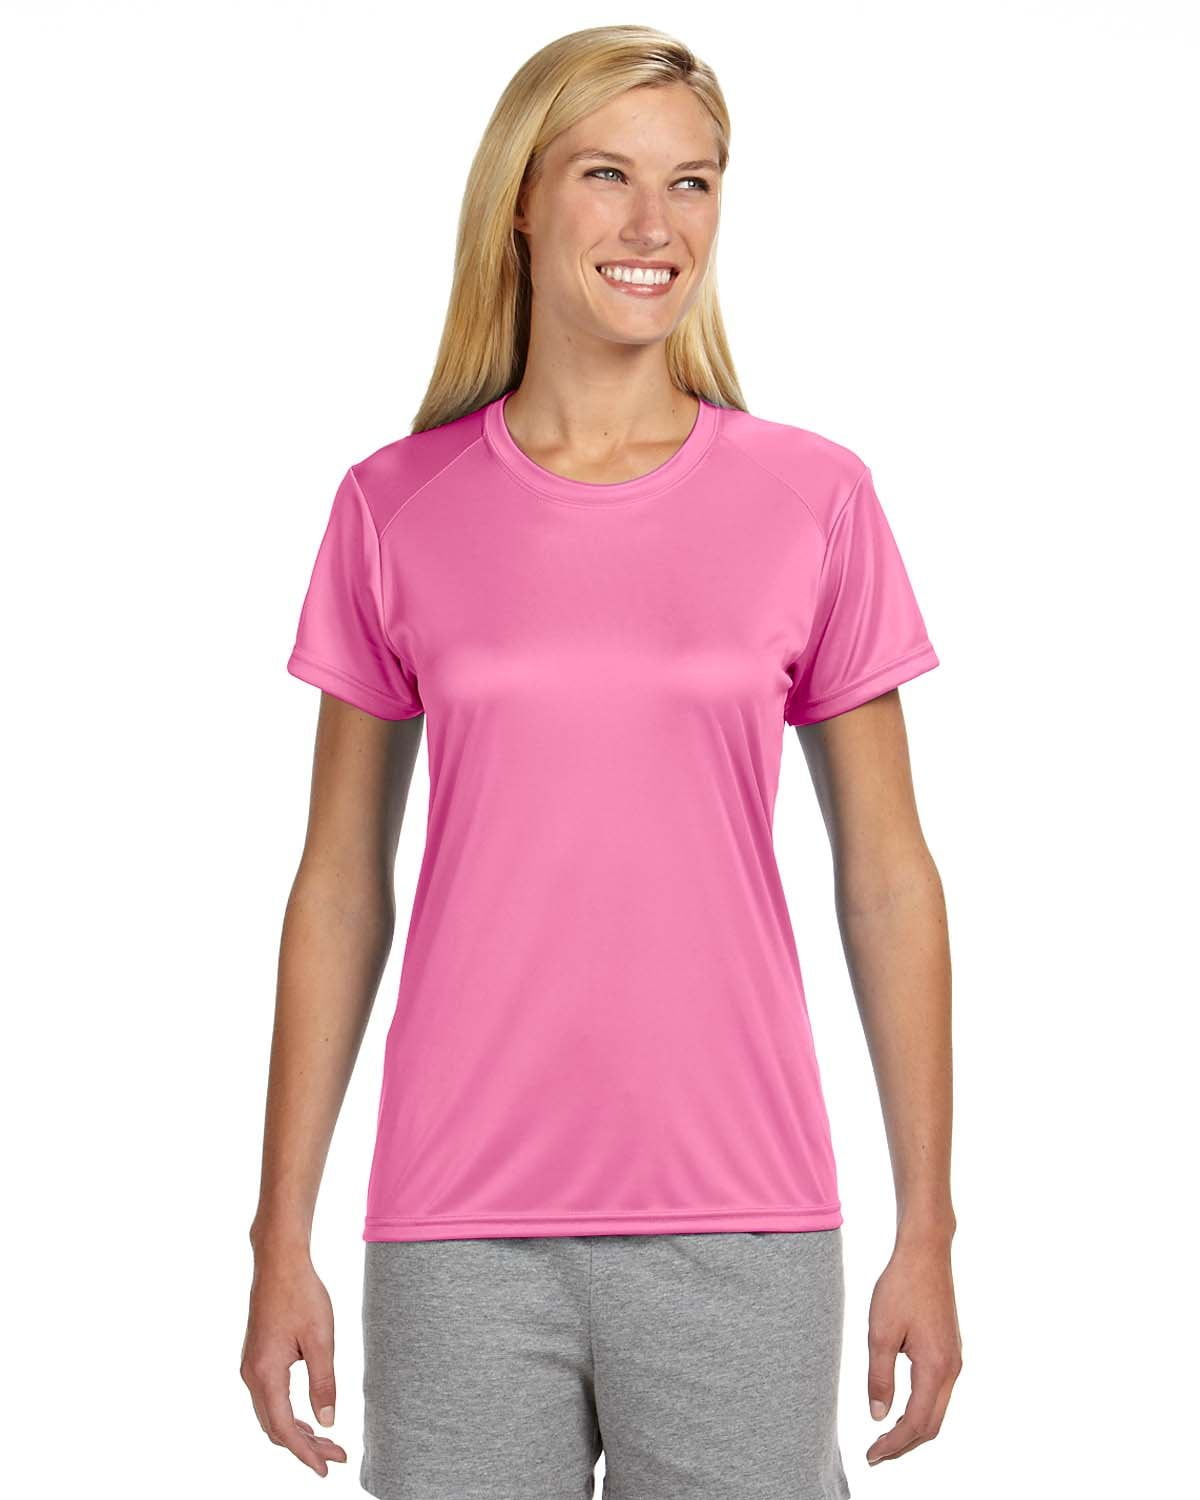 TCA Performance Womens Baselayer Top Pink Short Sleeve Sweat Wicking Gym Workout 